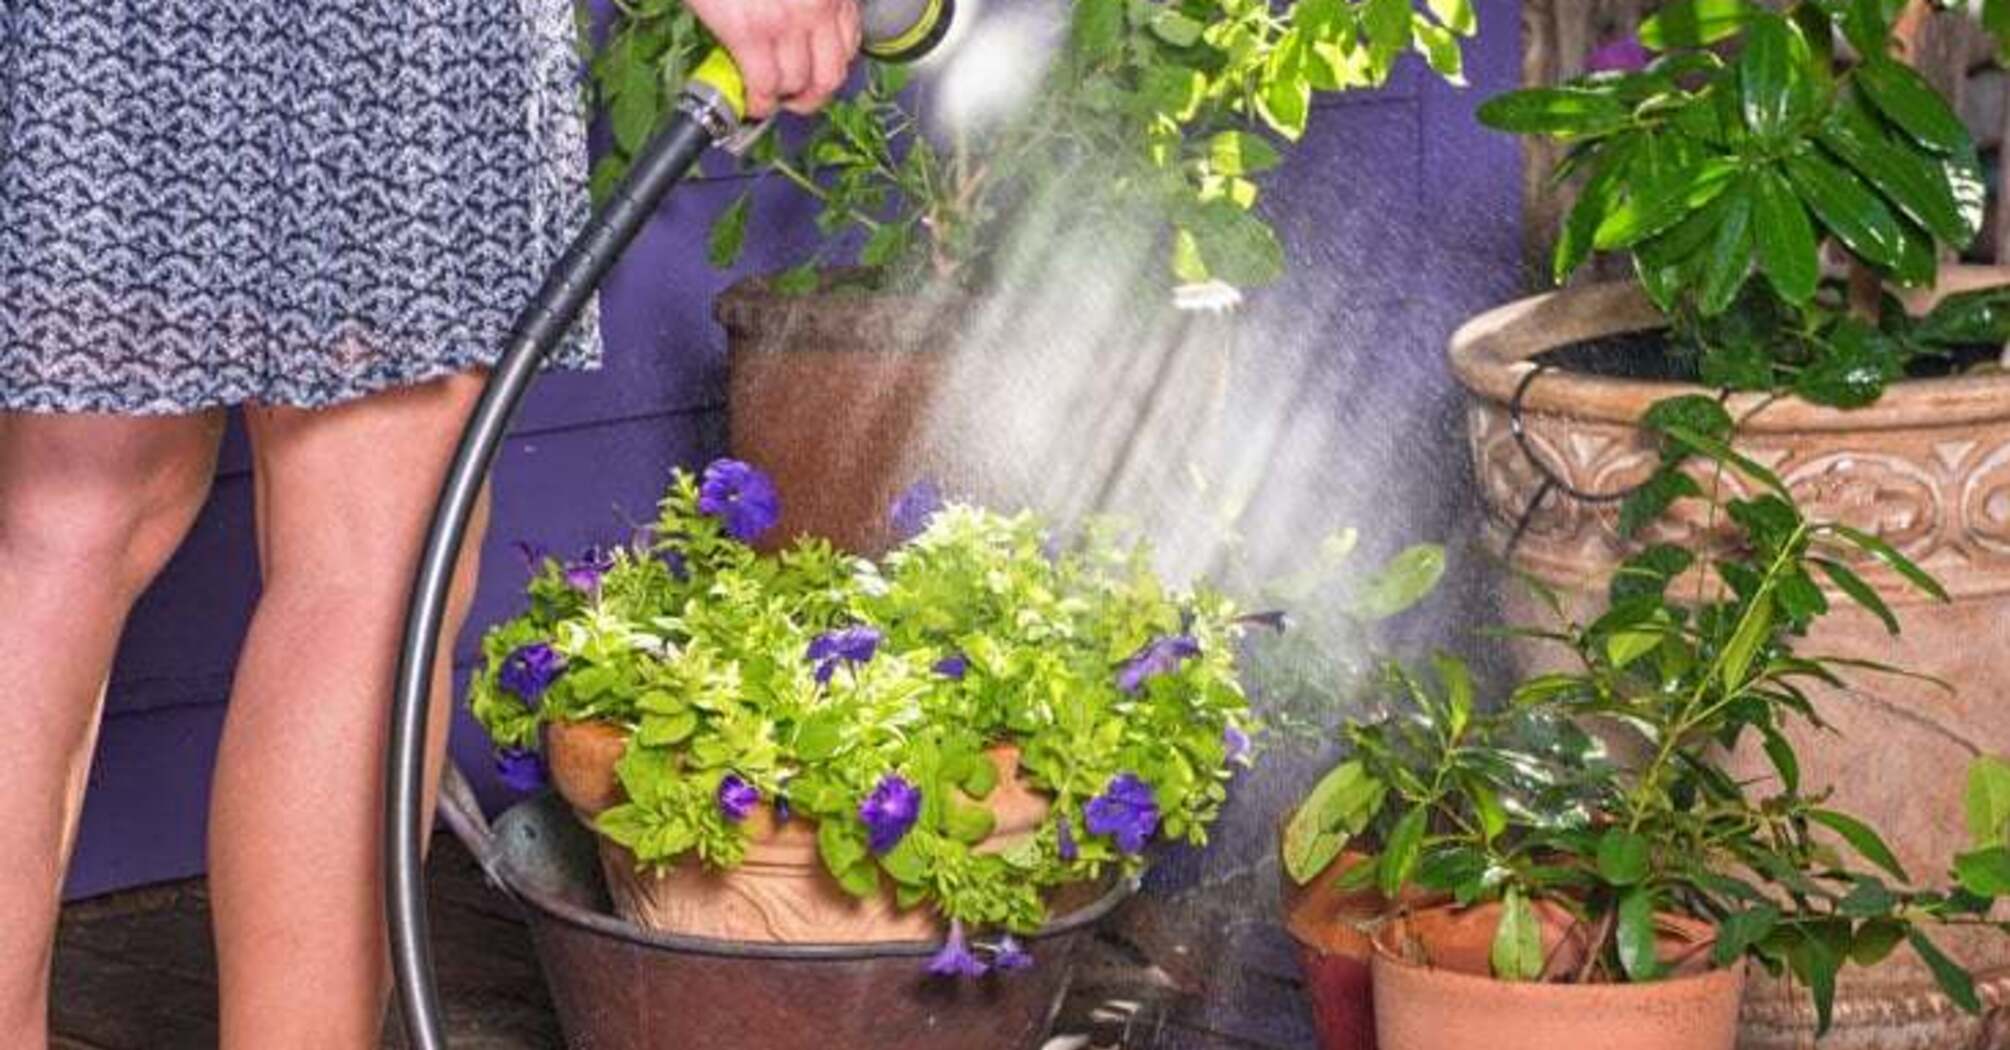 Why gardeners soak matches in water